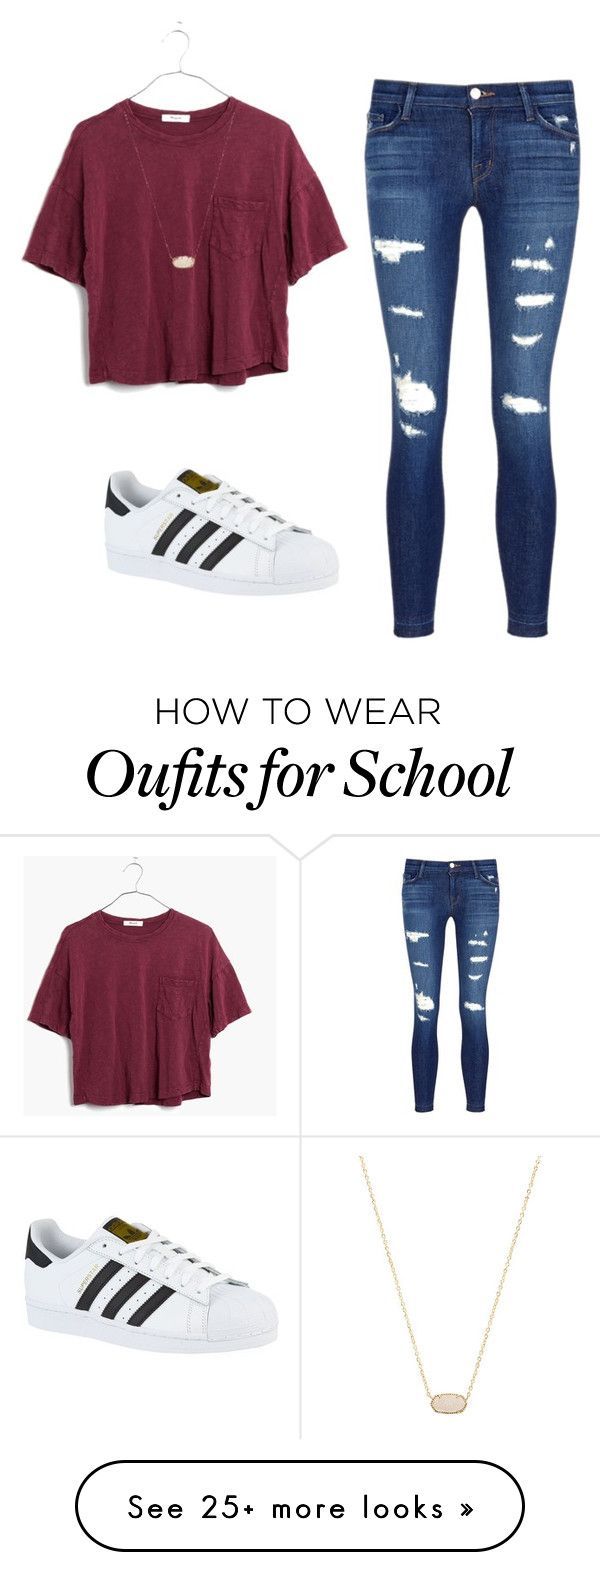 “School outfit #1” by e-m-dog on Polyvore featuring J Brand, adidas, Madewell and